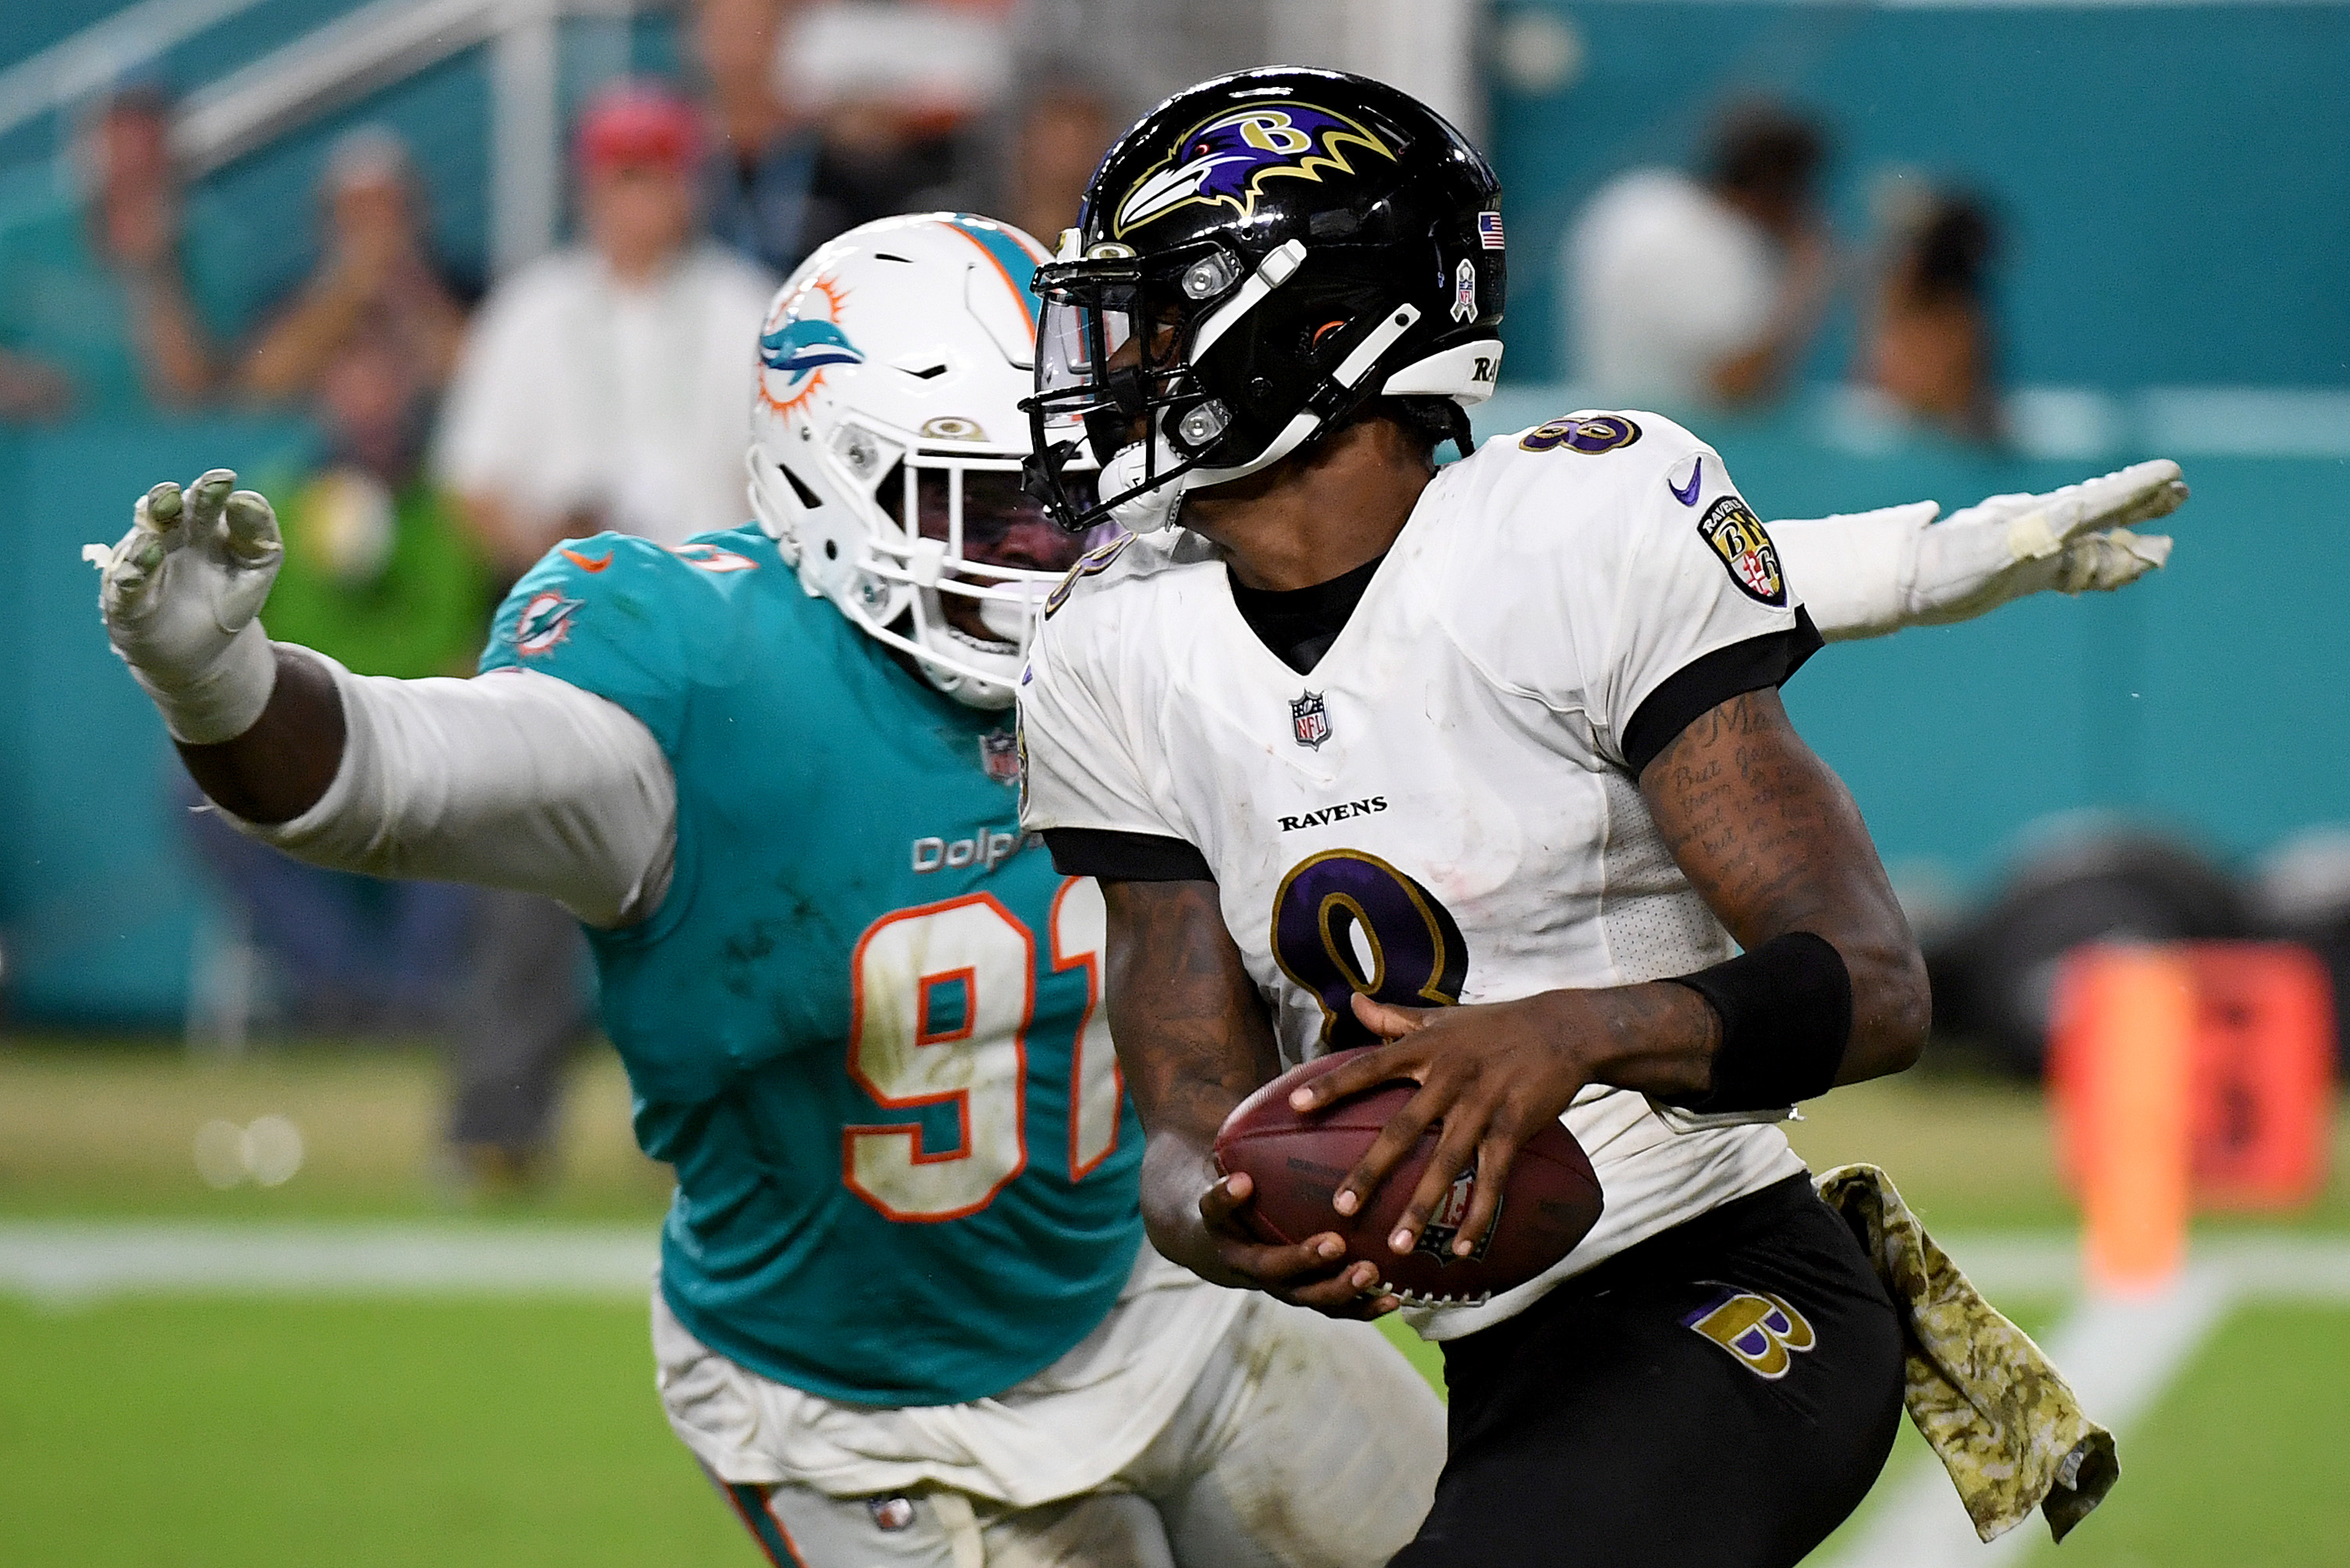 Ravens vs Dolphins live stream is tonight: How to watch Thursday